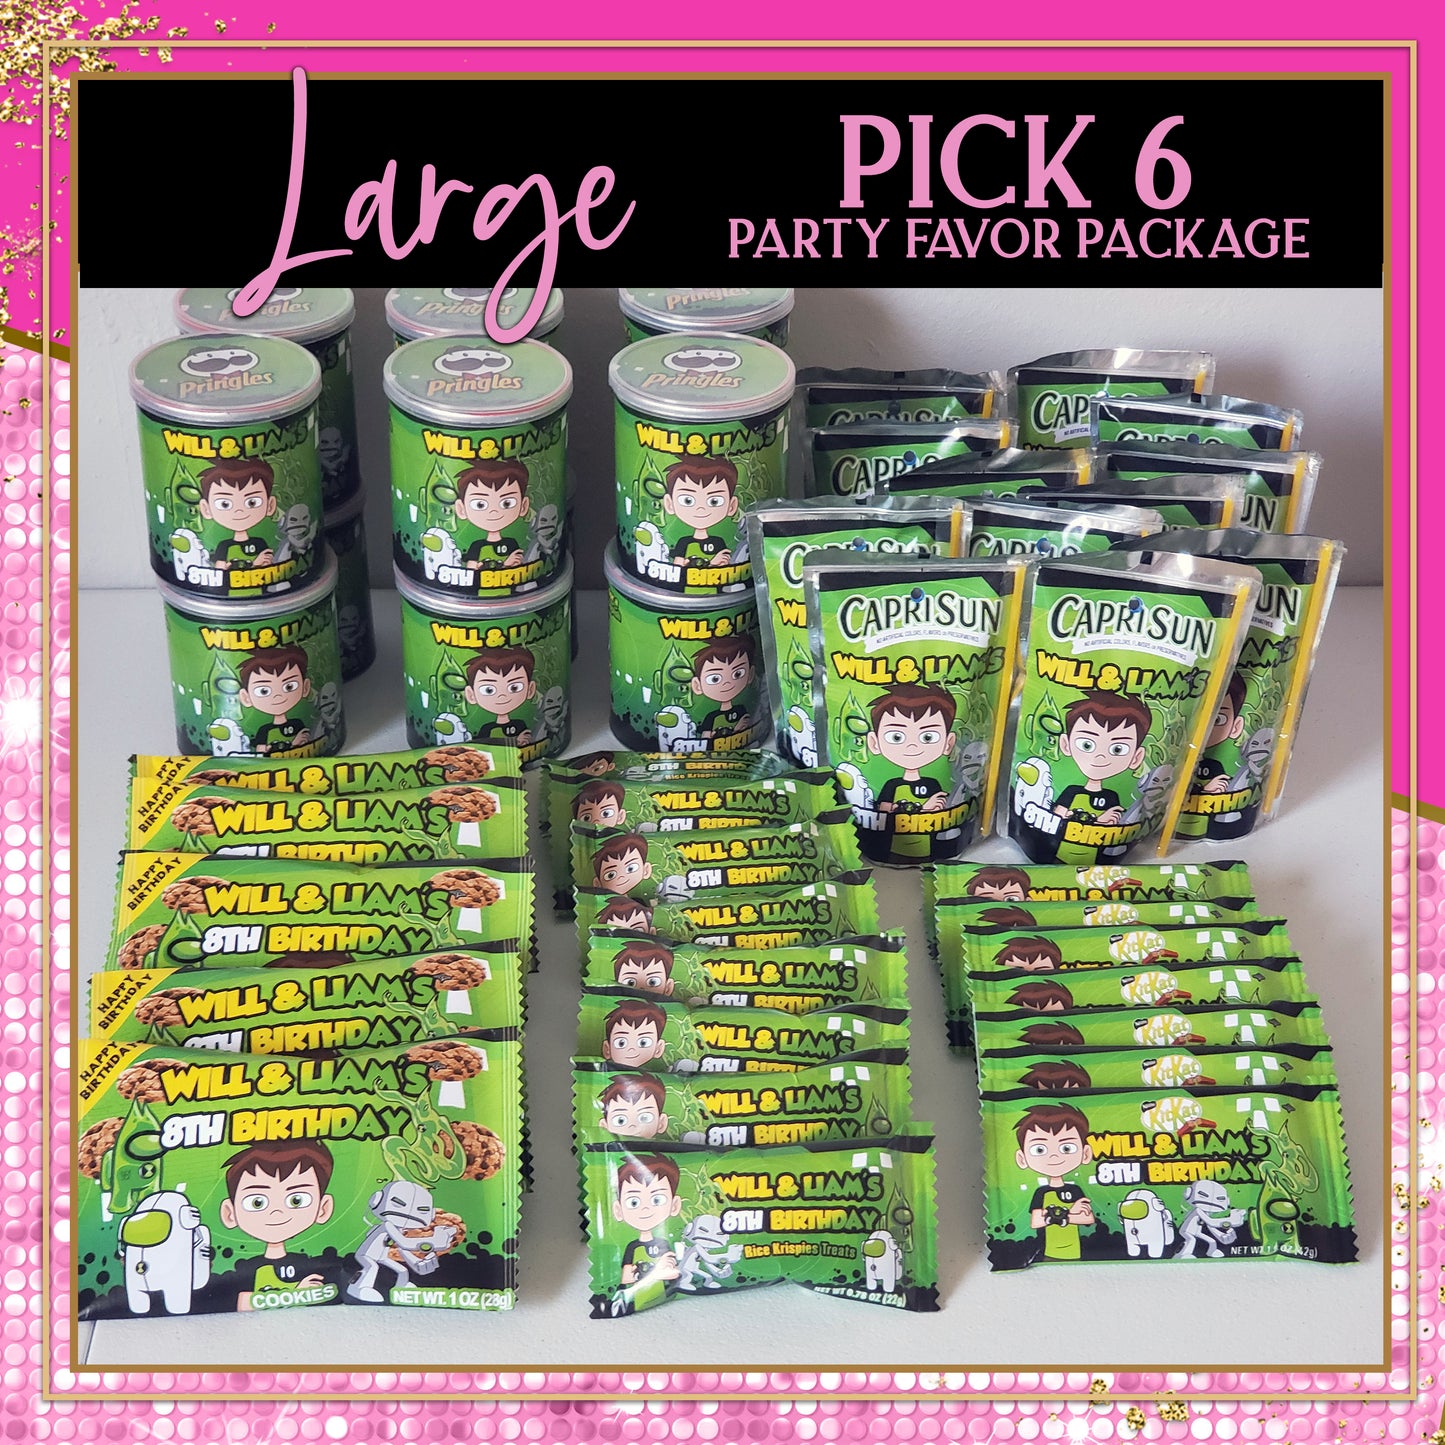 LARGE Package (PICK 6 PARTY FAVORS)